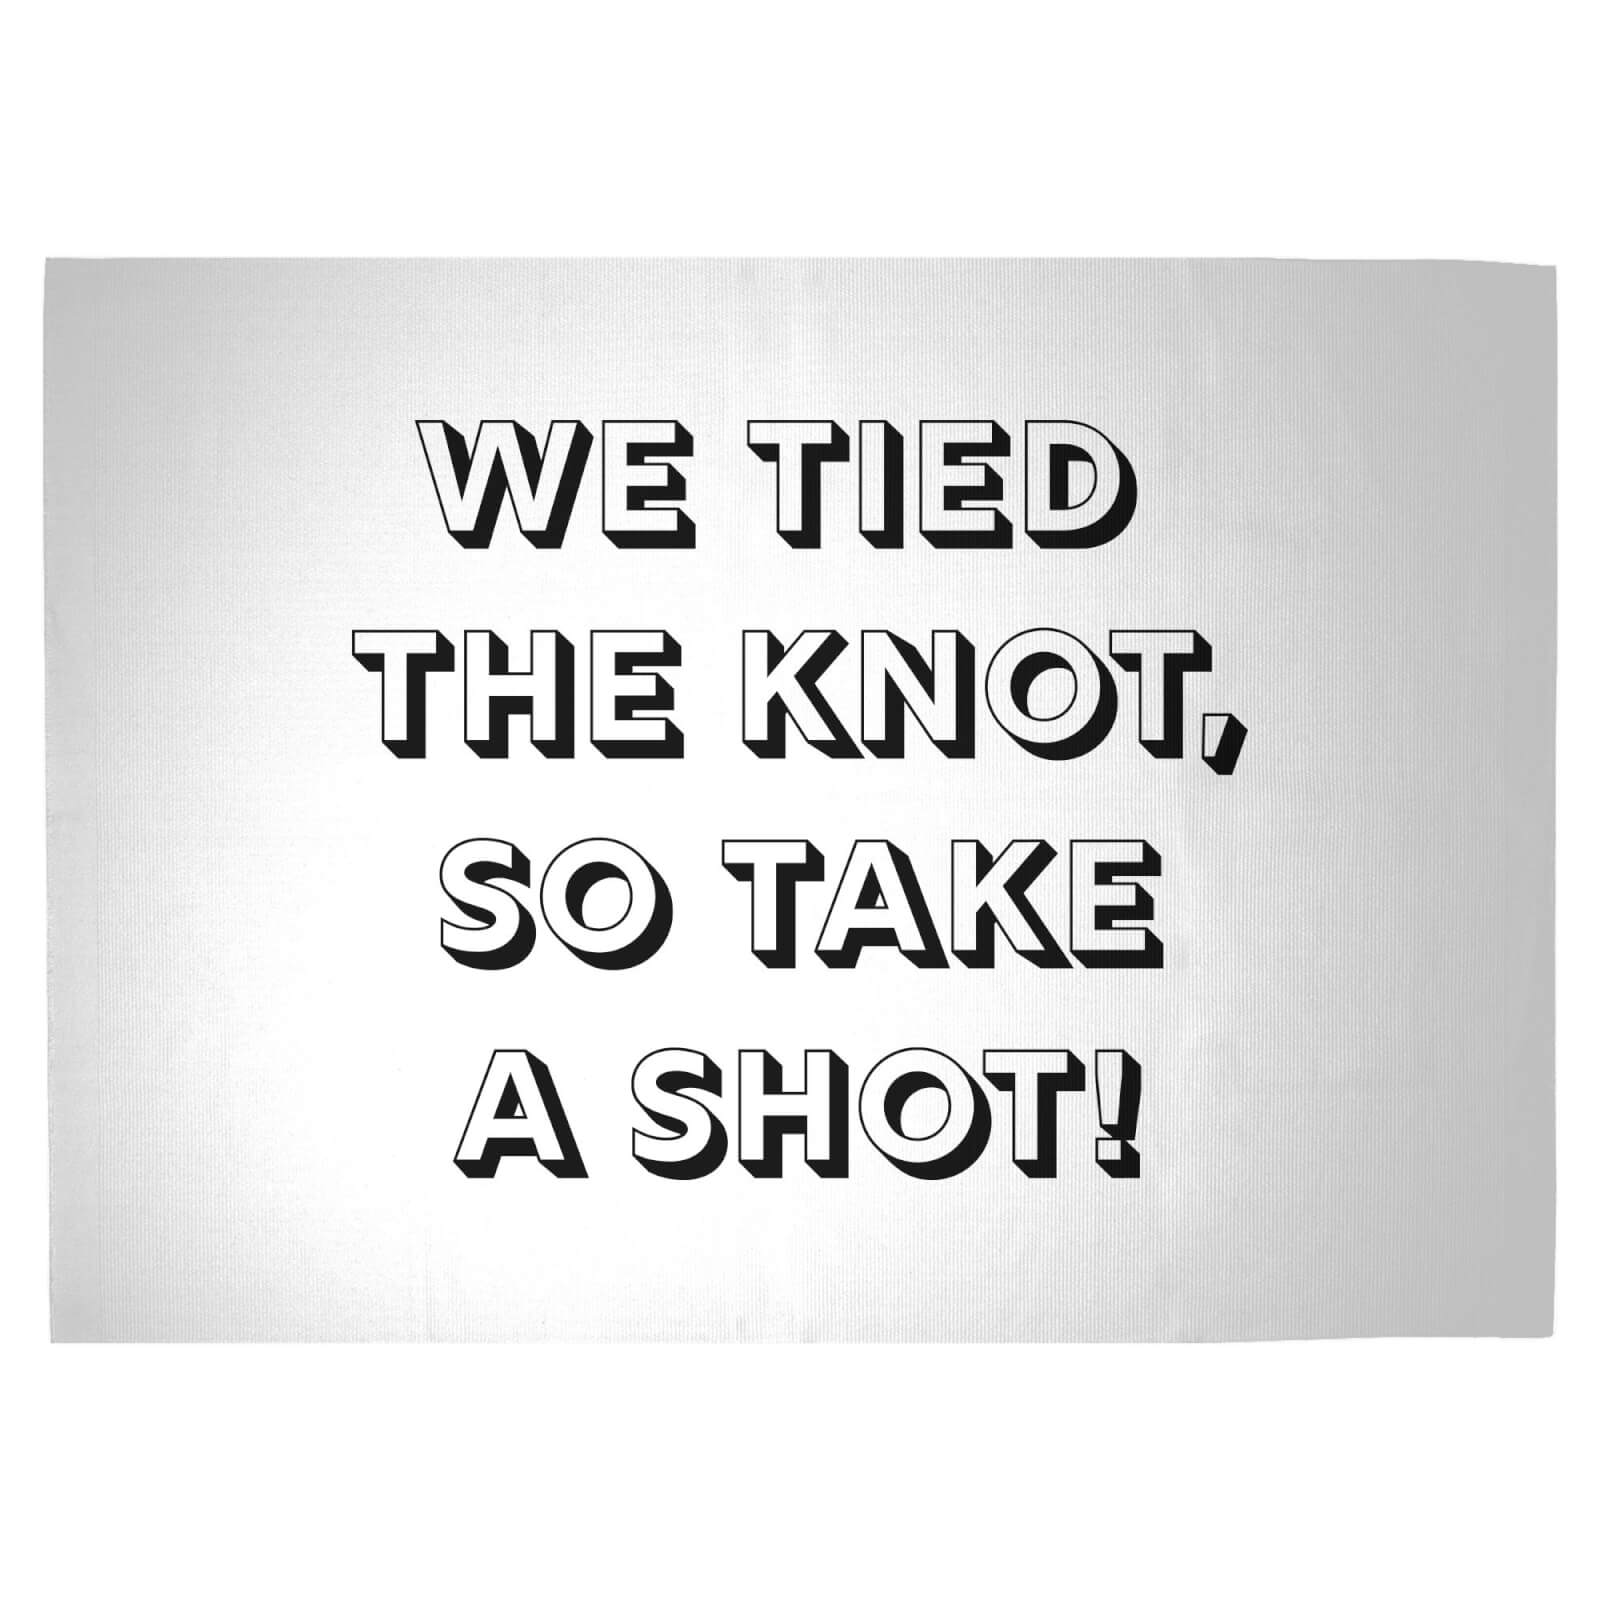 We Tied The Knot, So Take A Shot! Woven Rug - Large